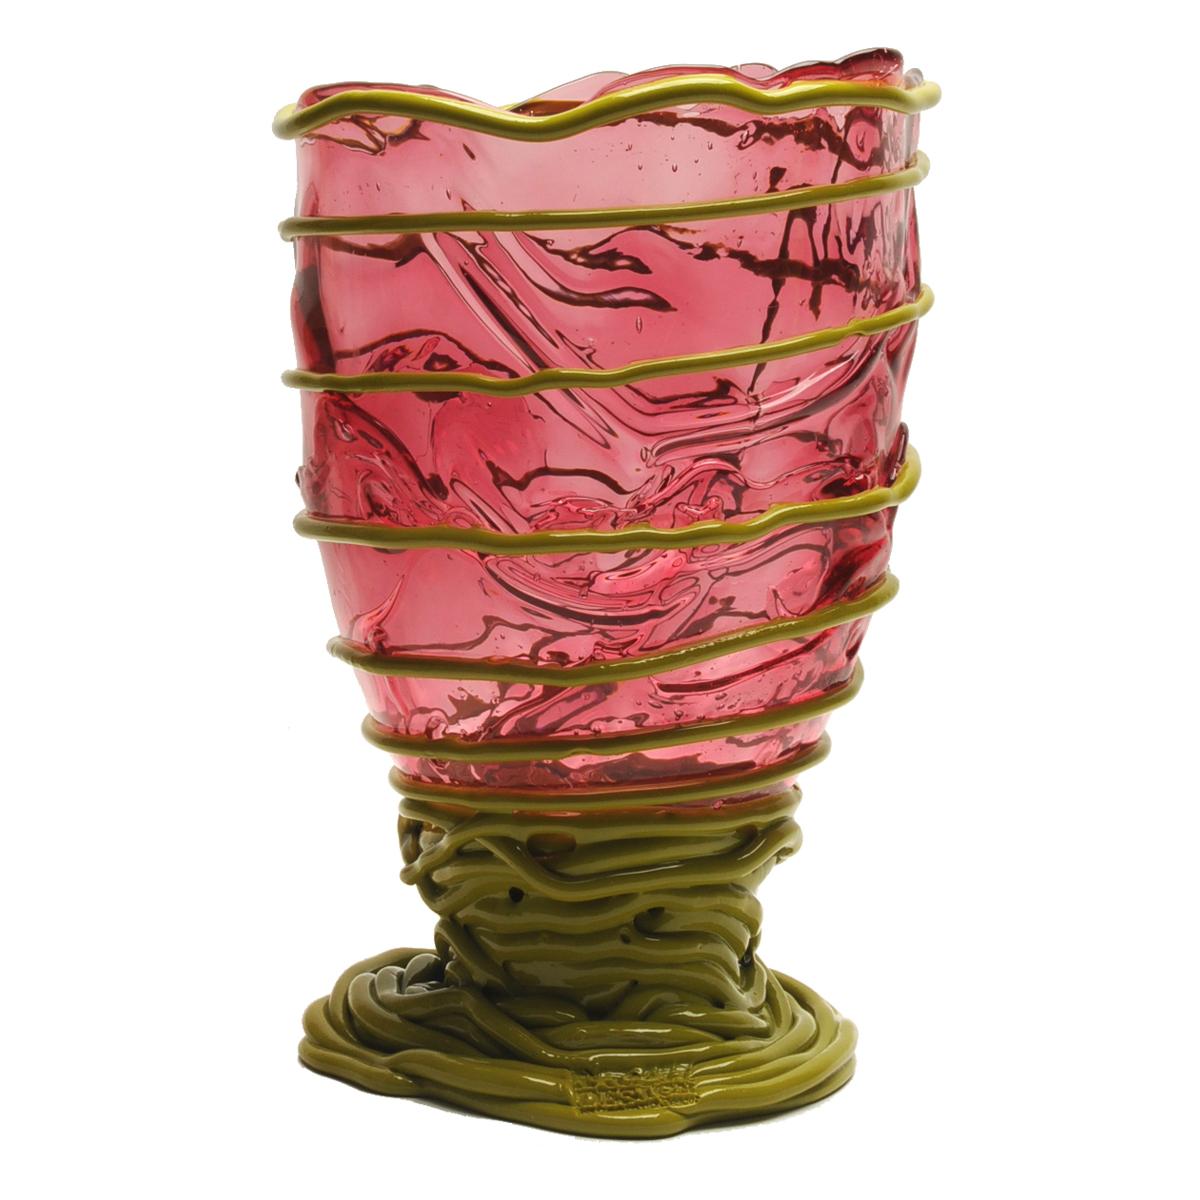 Pompitu II vase, clear light fuchsia, matt dust green.

Vase in soft resin designed by Gaetano Pesce in 1995 for Fish Design collection.

Measures: XL - ø 30cm x H 56cm

Other sizes available

Colours: light fuchsia, dust green.
Vase in